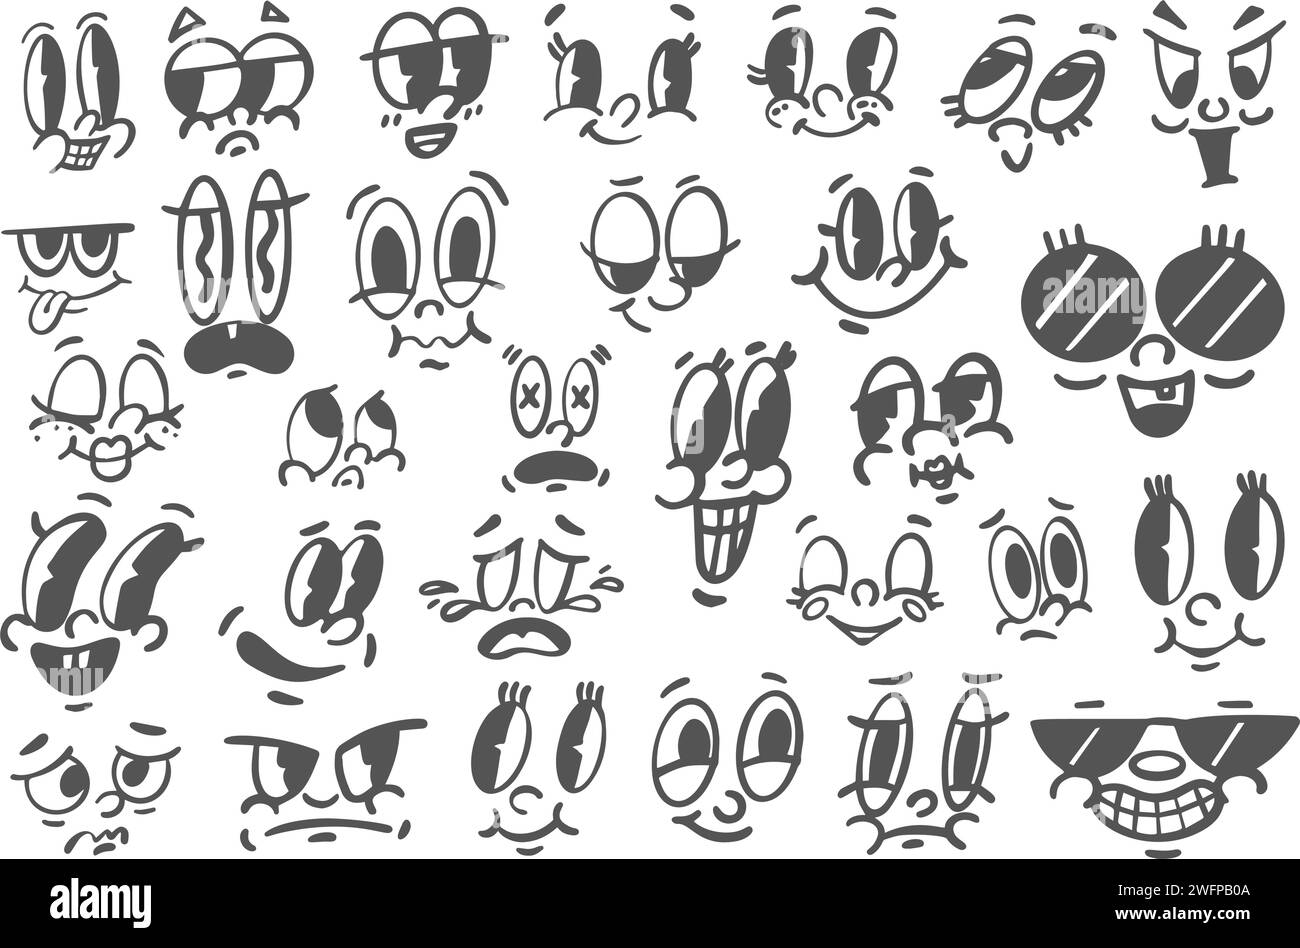 Cartoon retro faces. Comic cute mascot set with funny smiling and angry expressions. Old 50s caricature characters. Vector Stock Vector